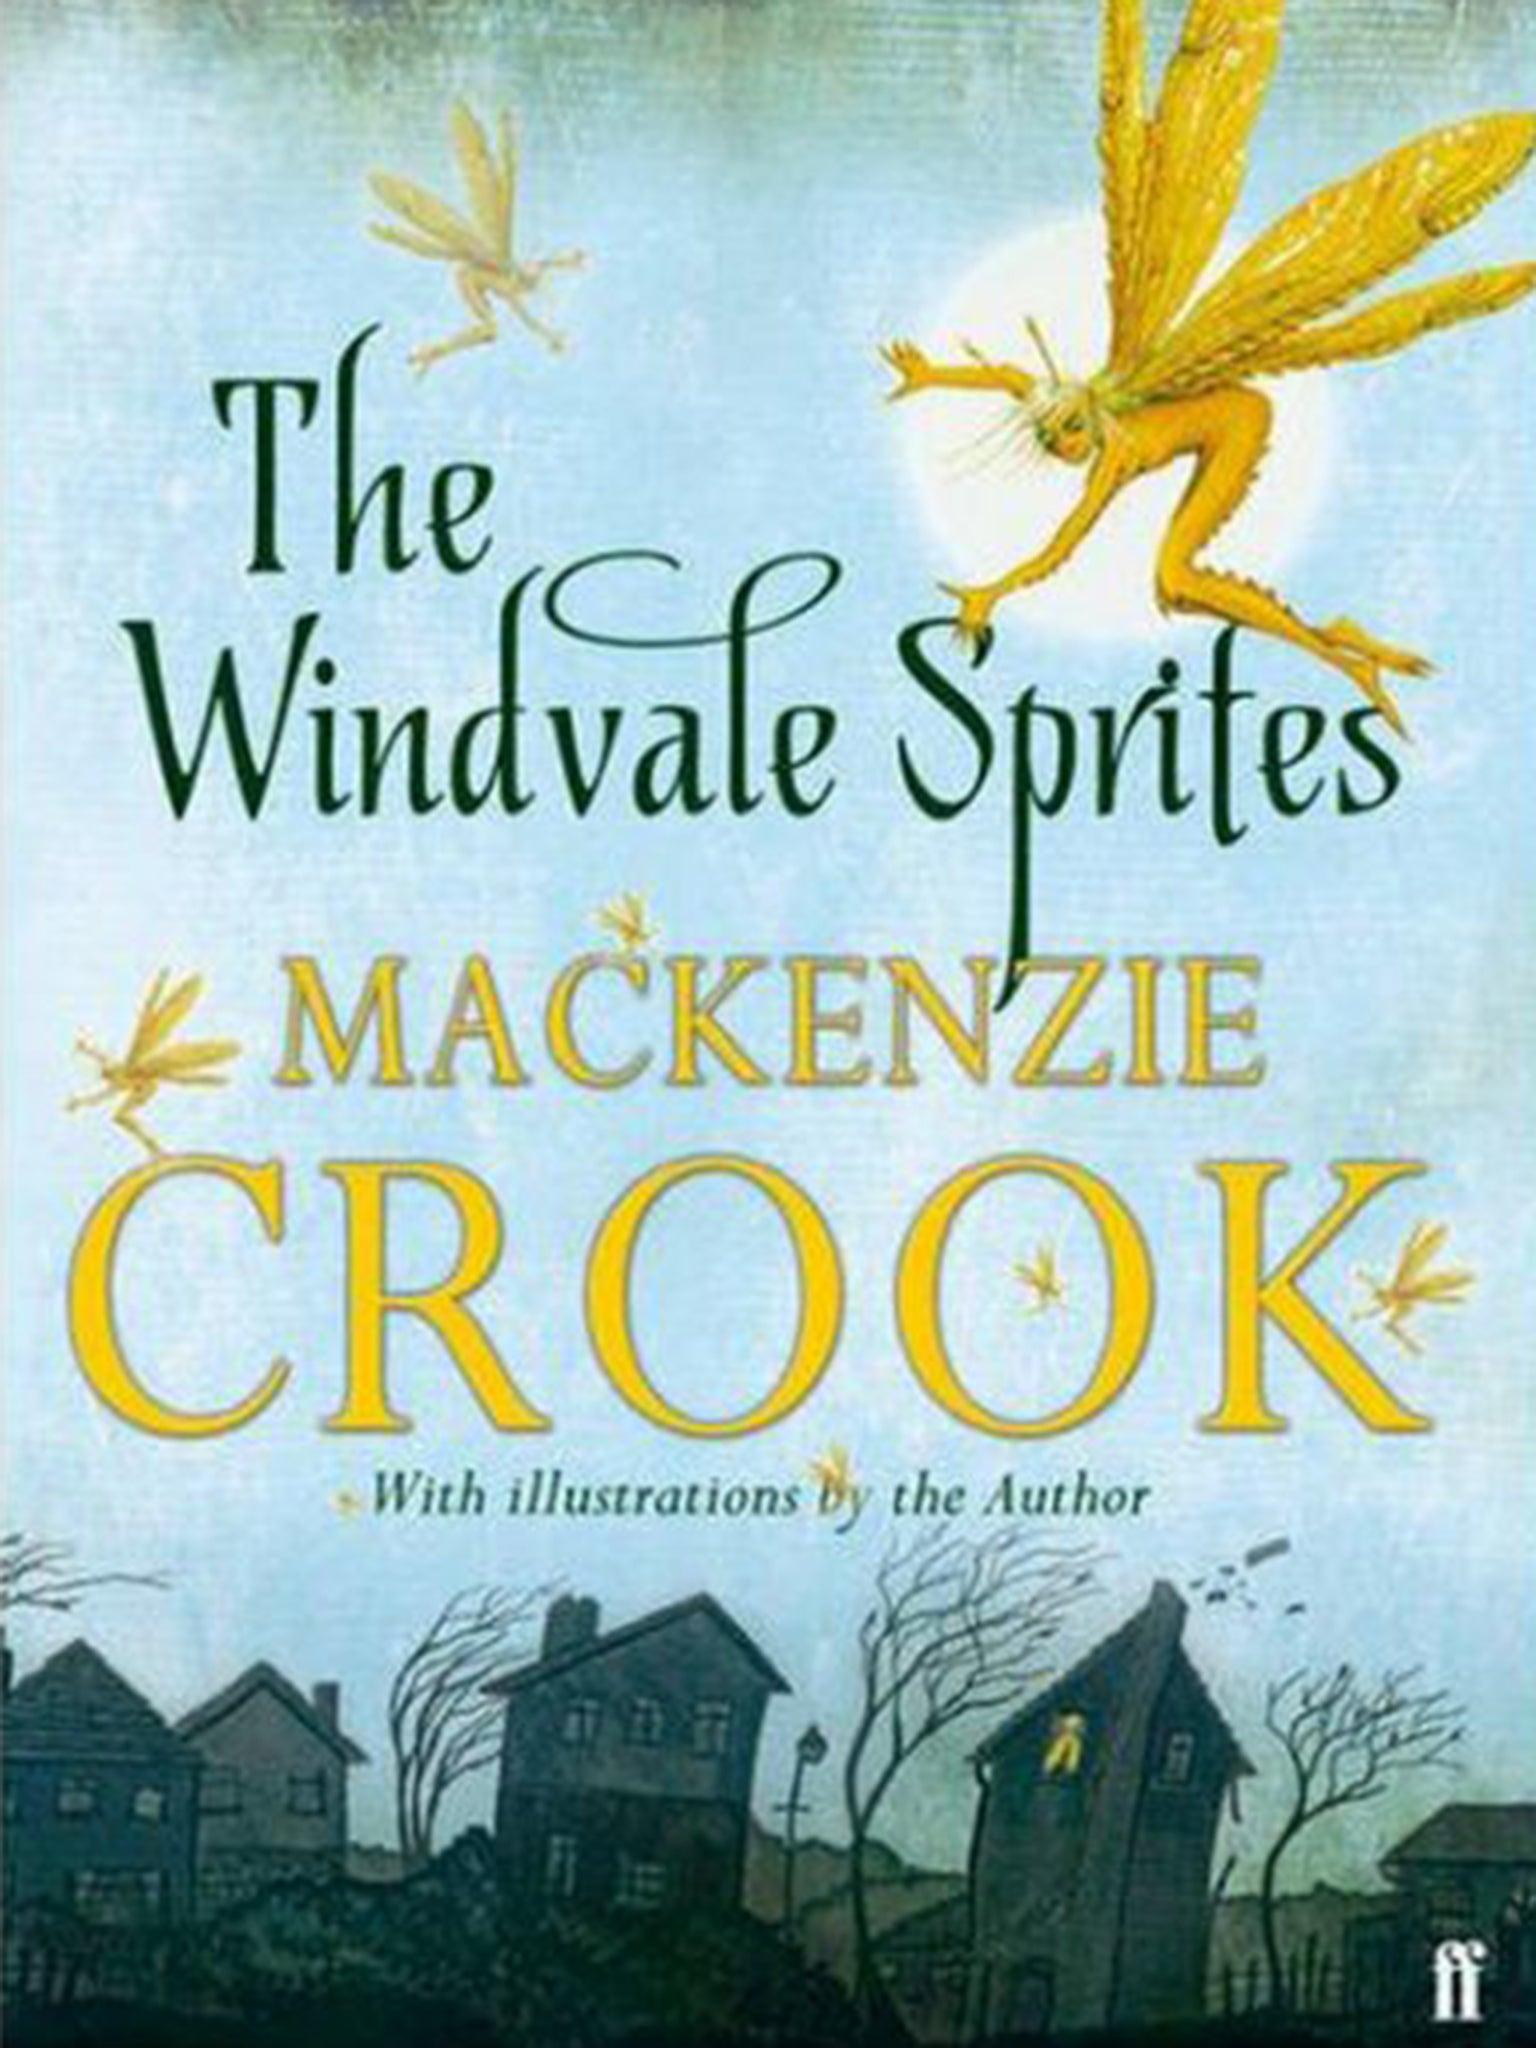 The Windvale Sprites is the first book by Mackenzie Crook, the actor from The Office and Pirates of the Caribbean